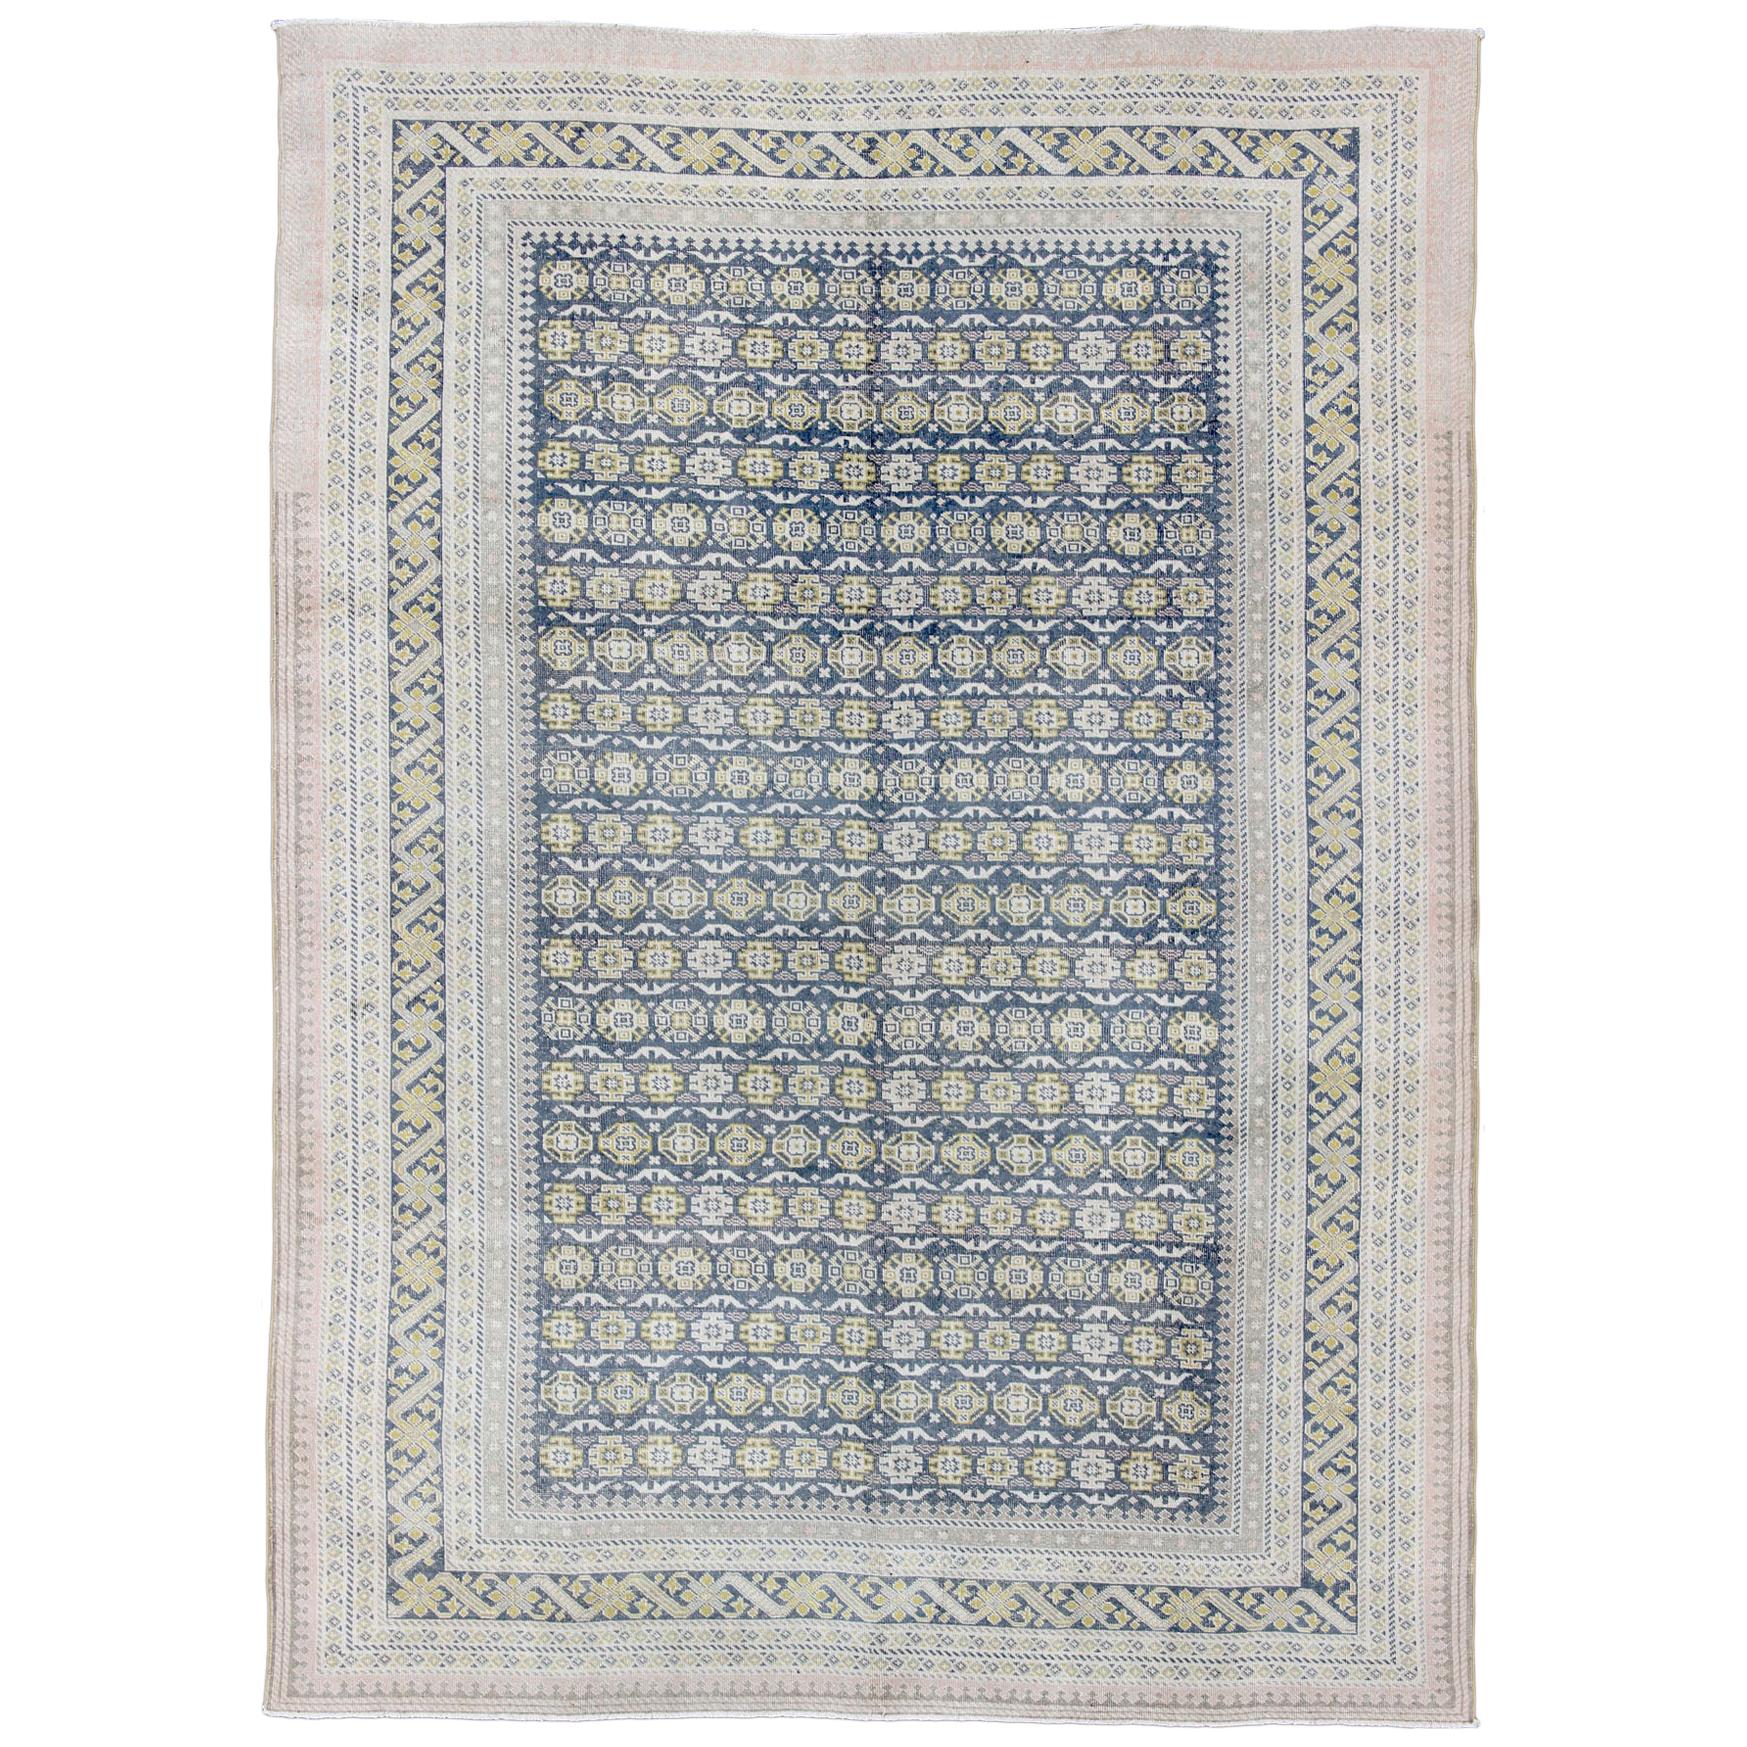 Antique Khotan Rug in Shades of Blue with Gray, L. Pink and Yellow Accents